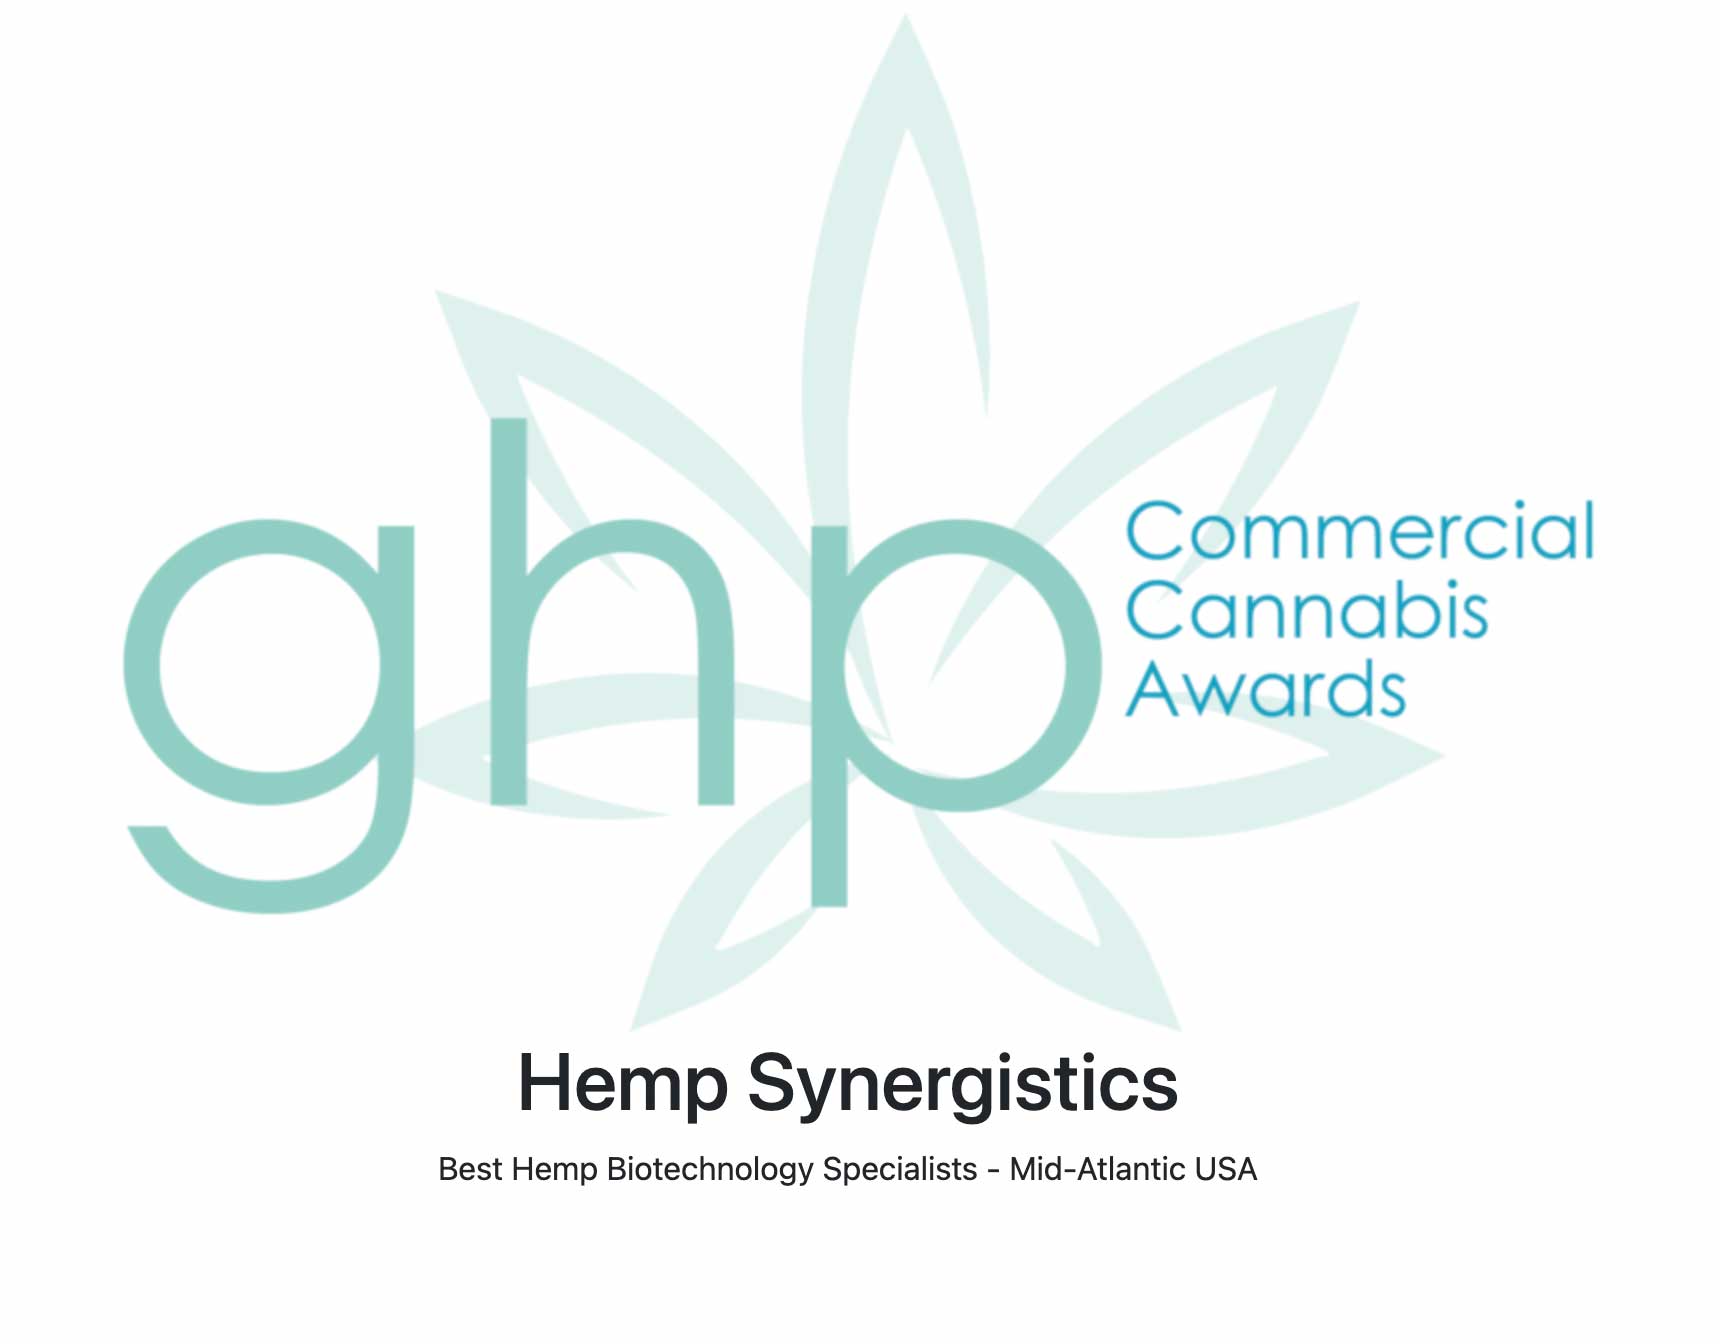 Hemp Synergistics Wins Award for Excellence in Cannabinoid Manufacturing